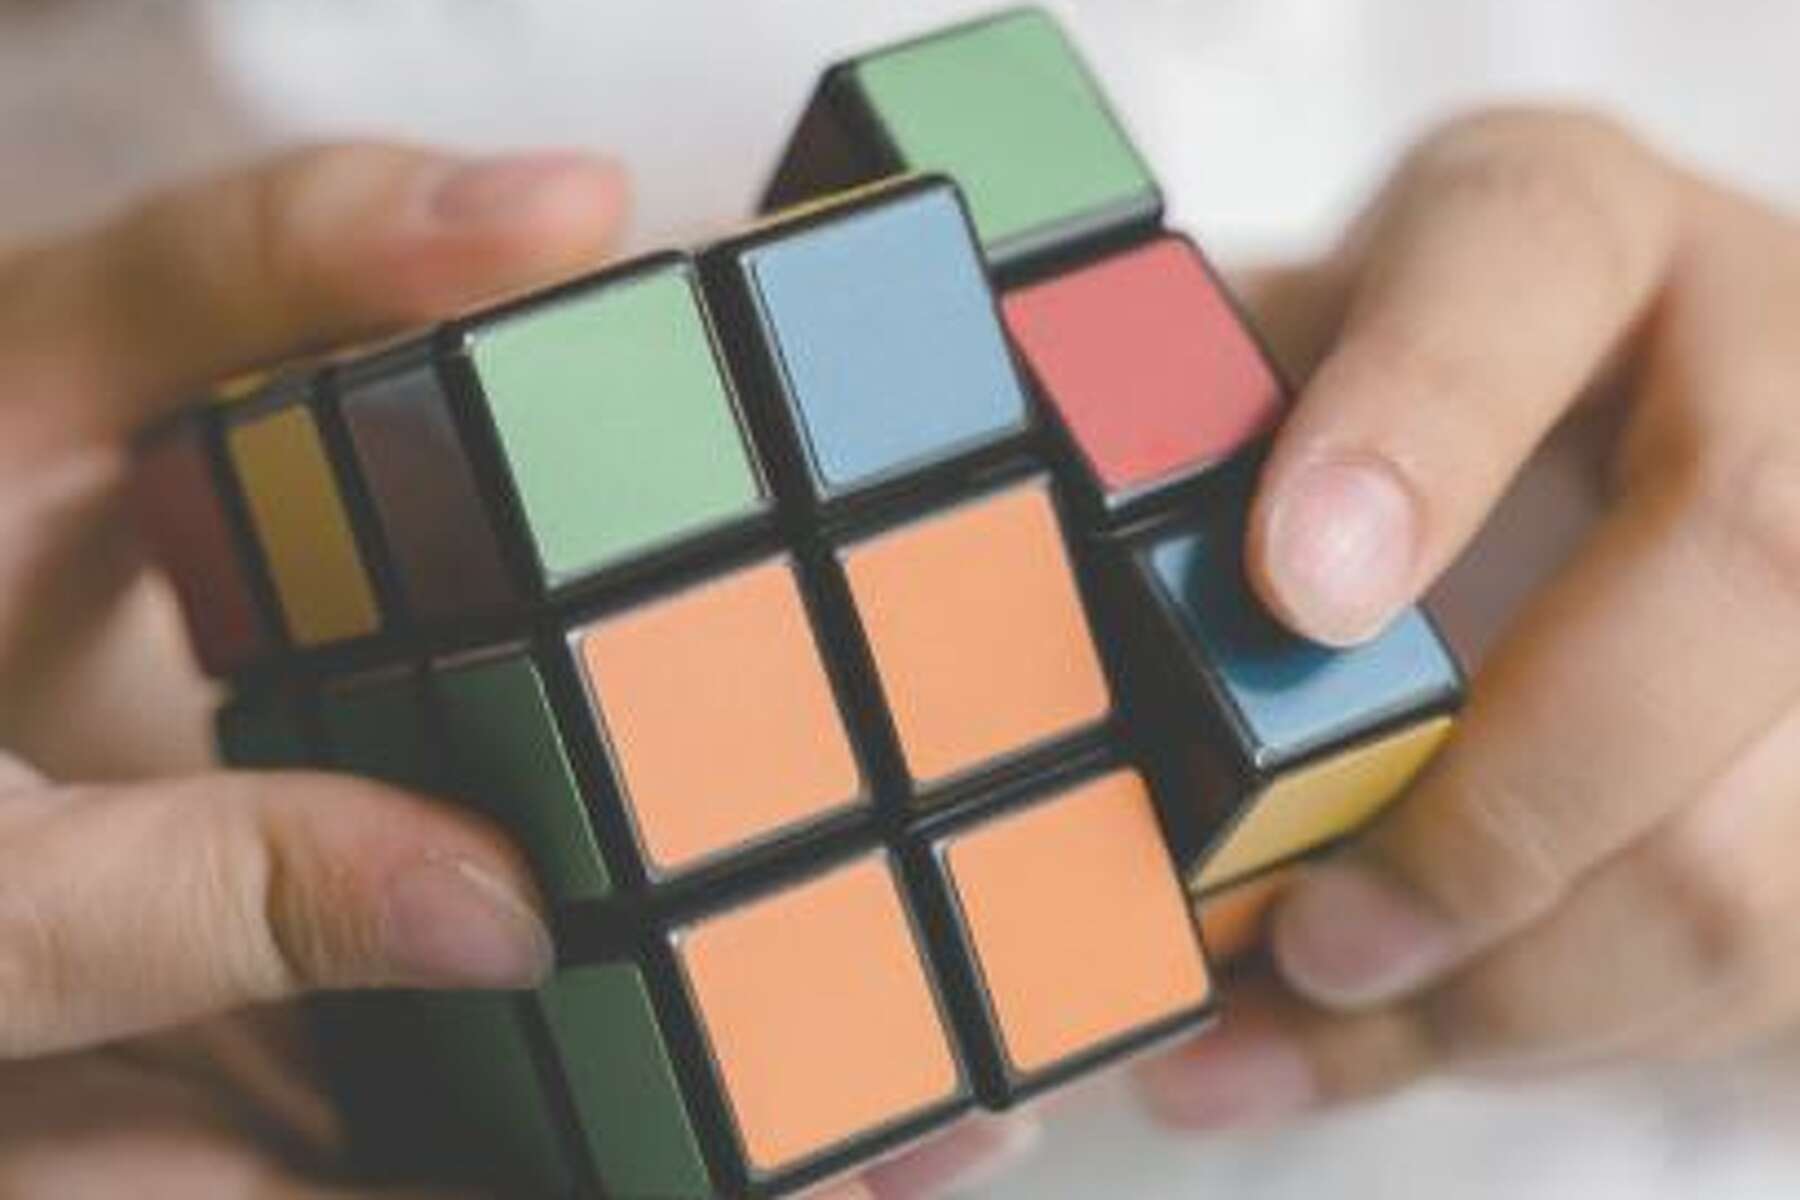 How to compete at a speedcubing competition 